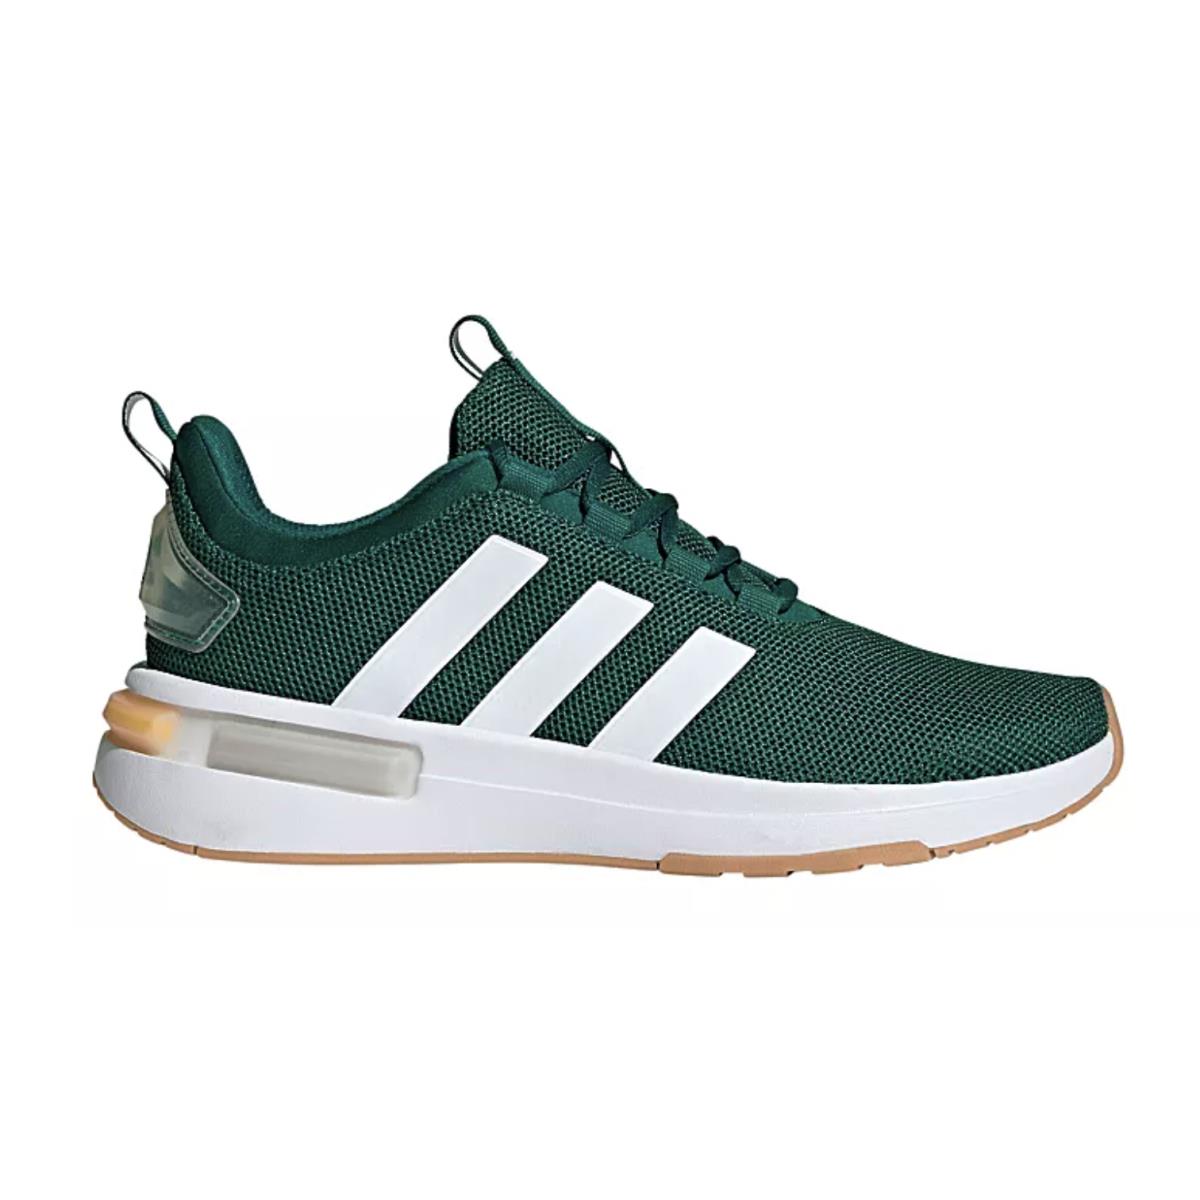 Adidas Casual Shoes Classic Mens TR23 Athletic Sneaker Multi Color All Sizes Green/White